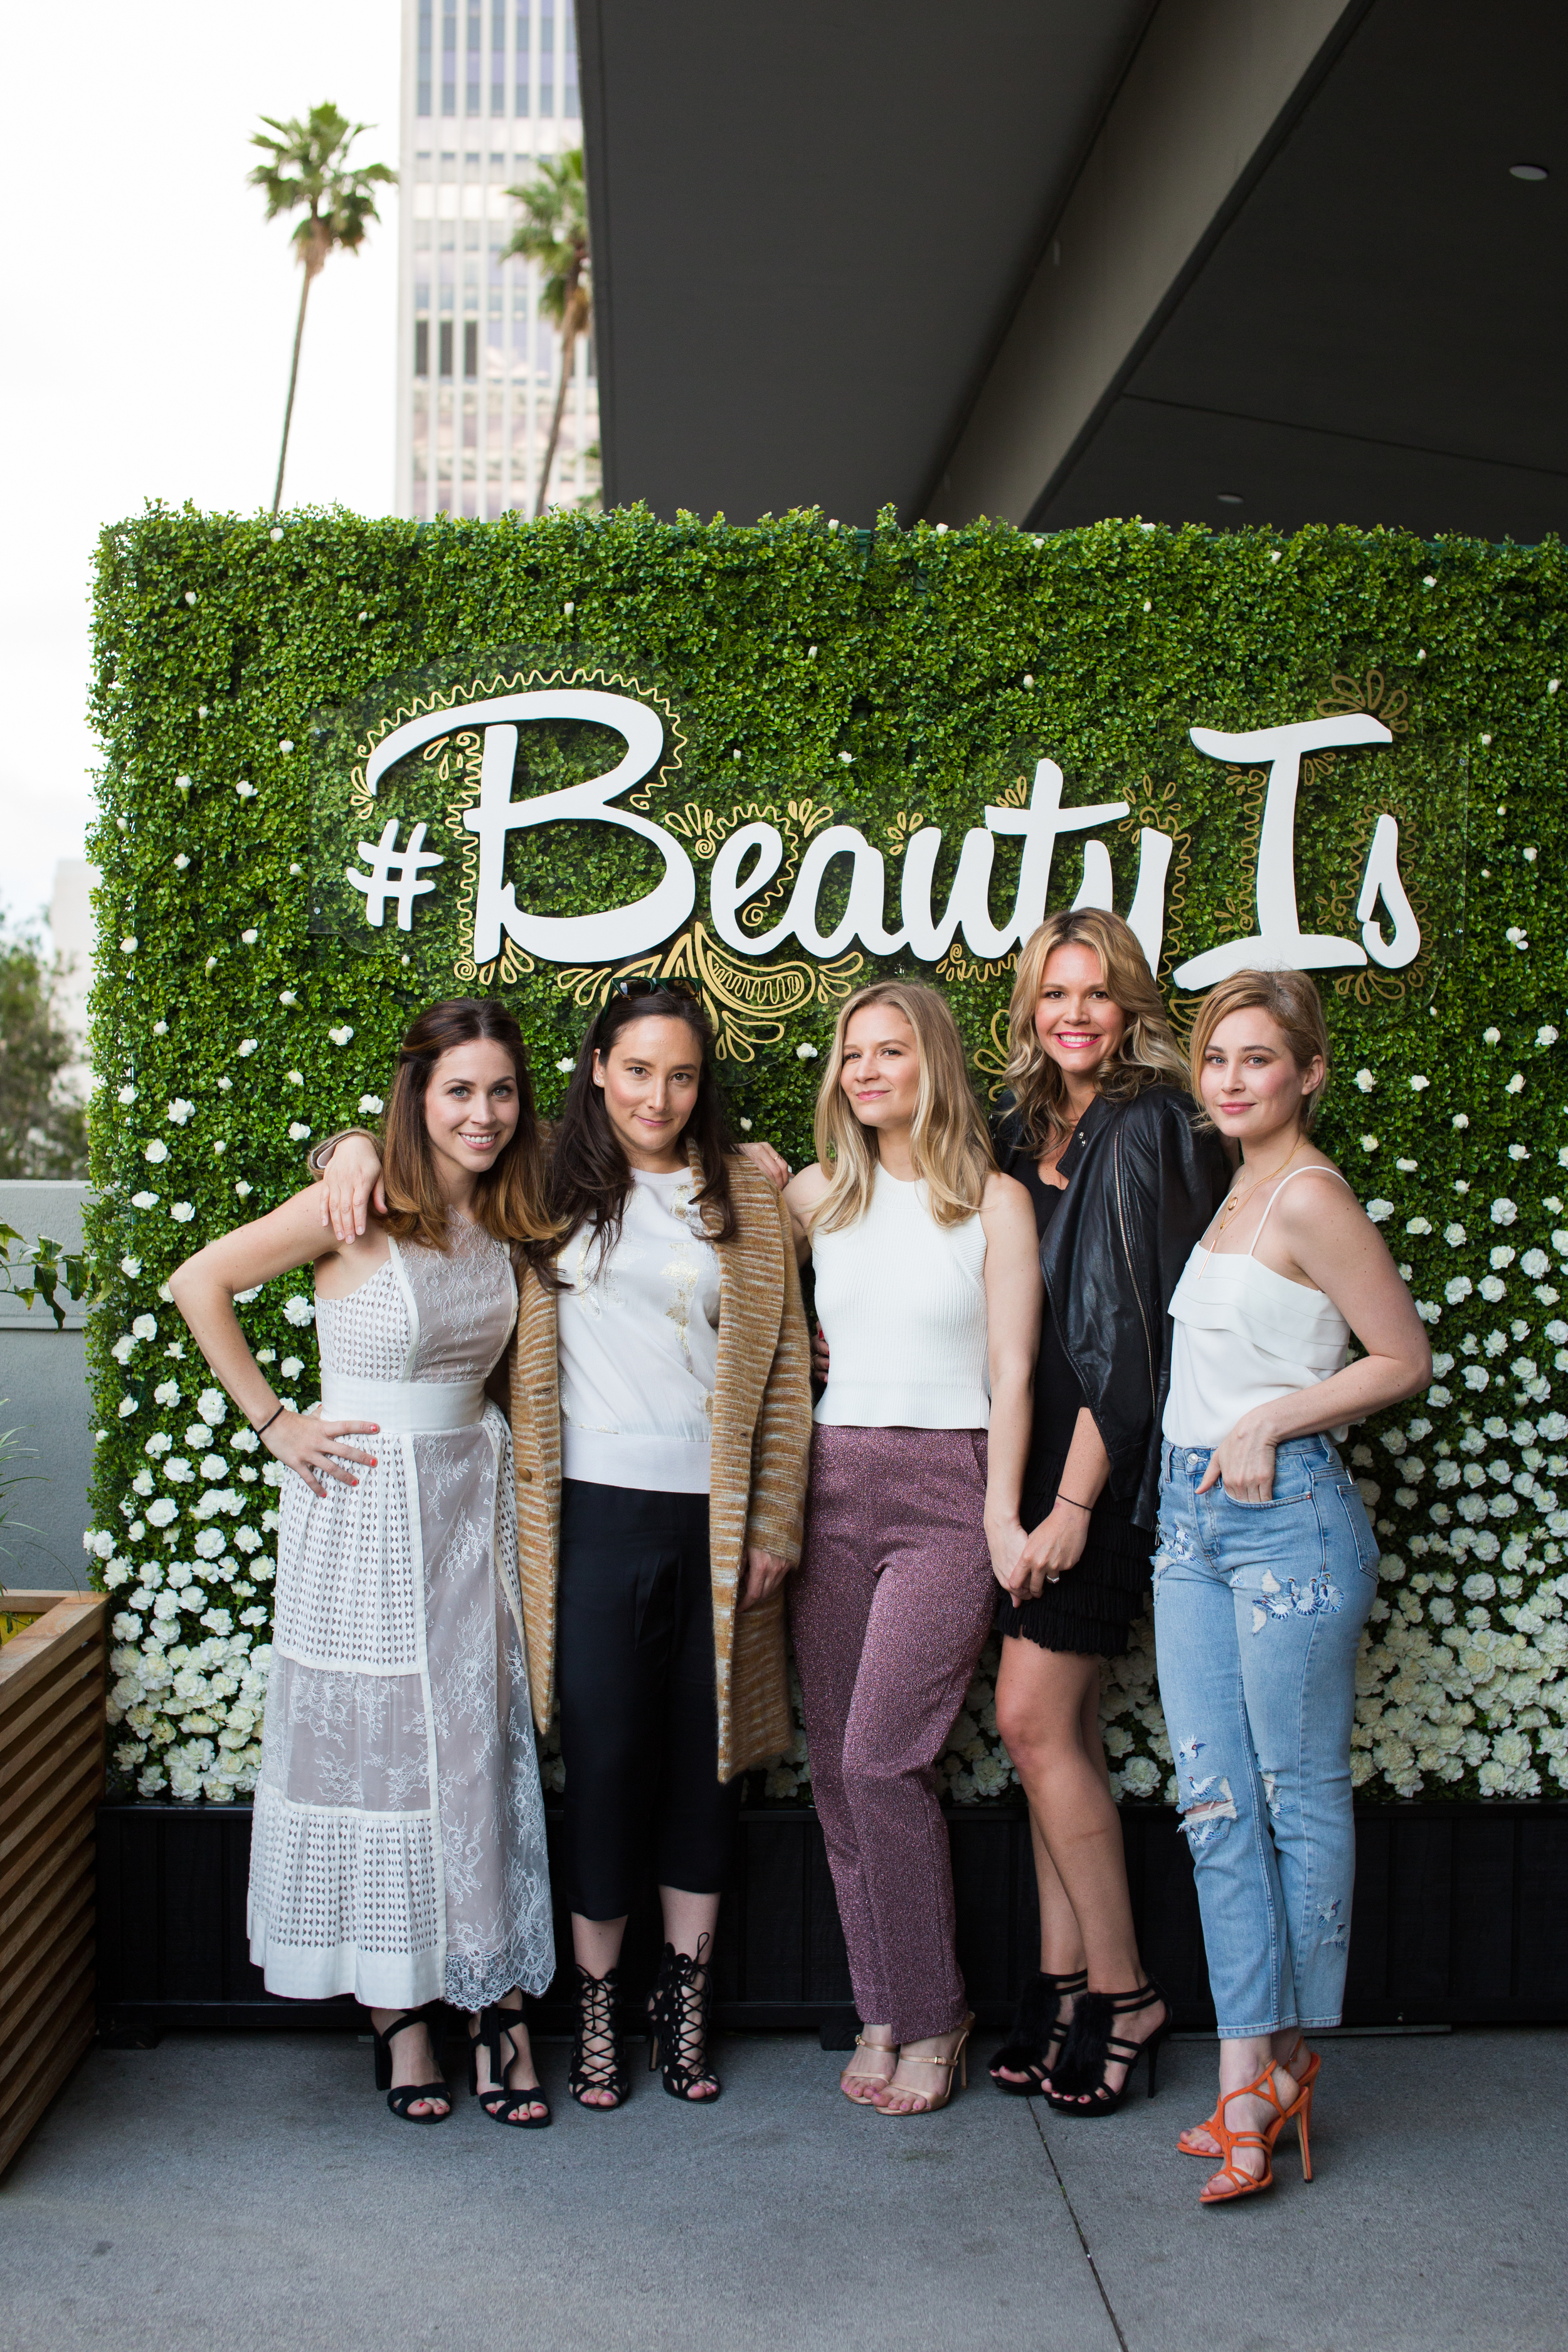   DBA and Create &amp; Cultivate Team celebrate #BeautyIs with Dove.&nbsp;  